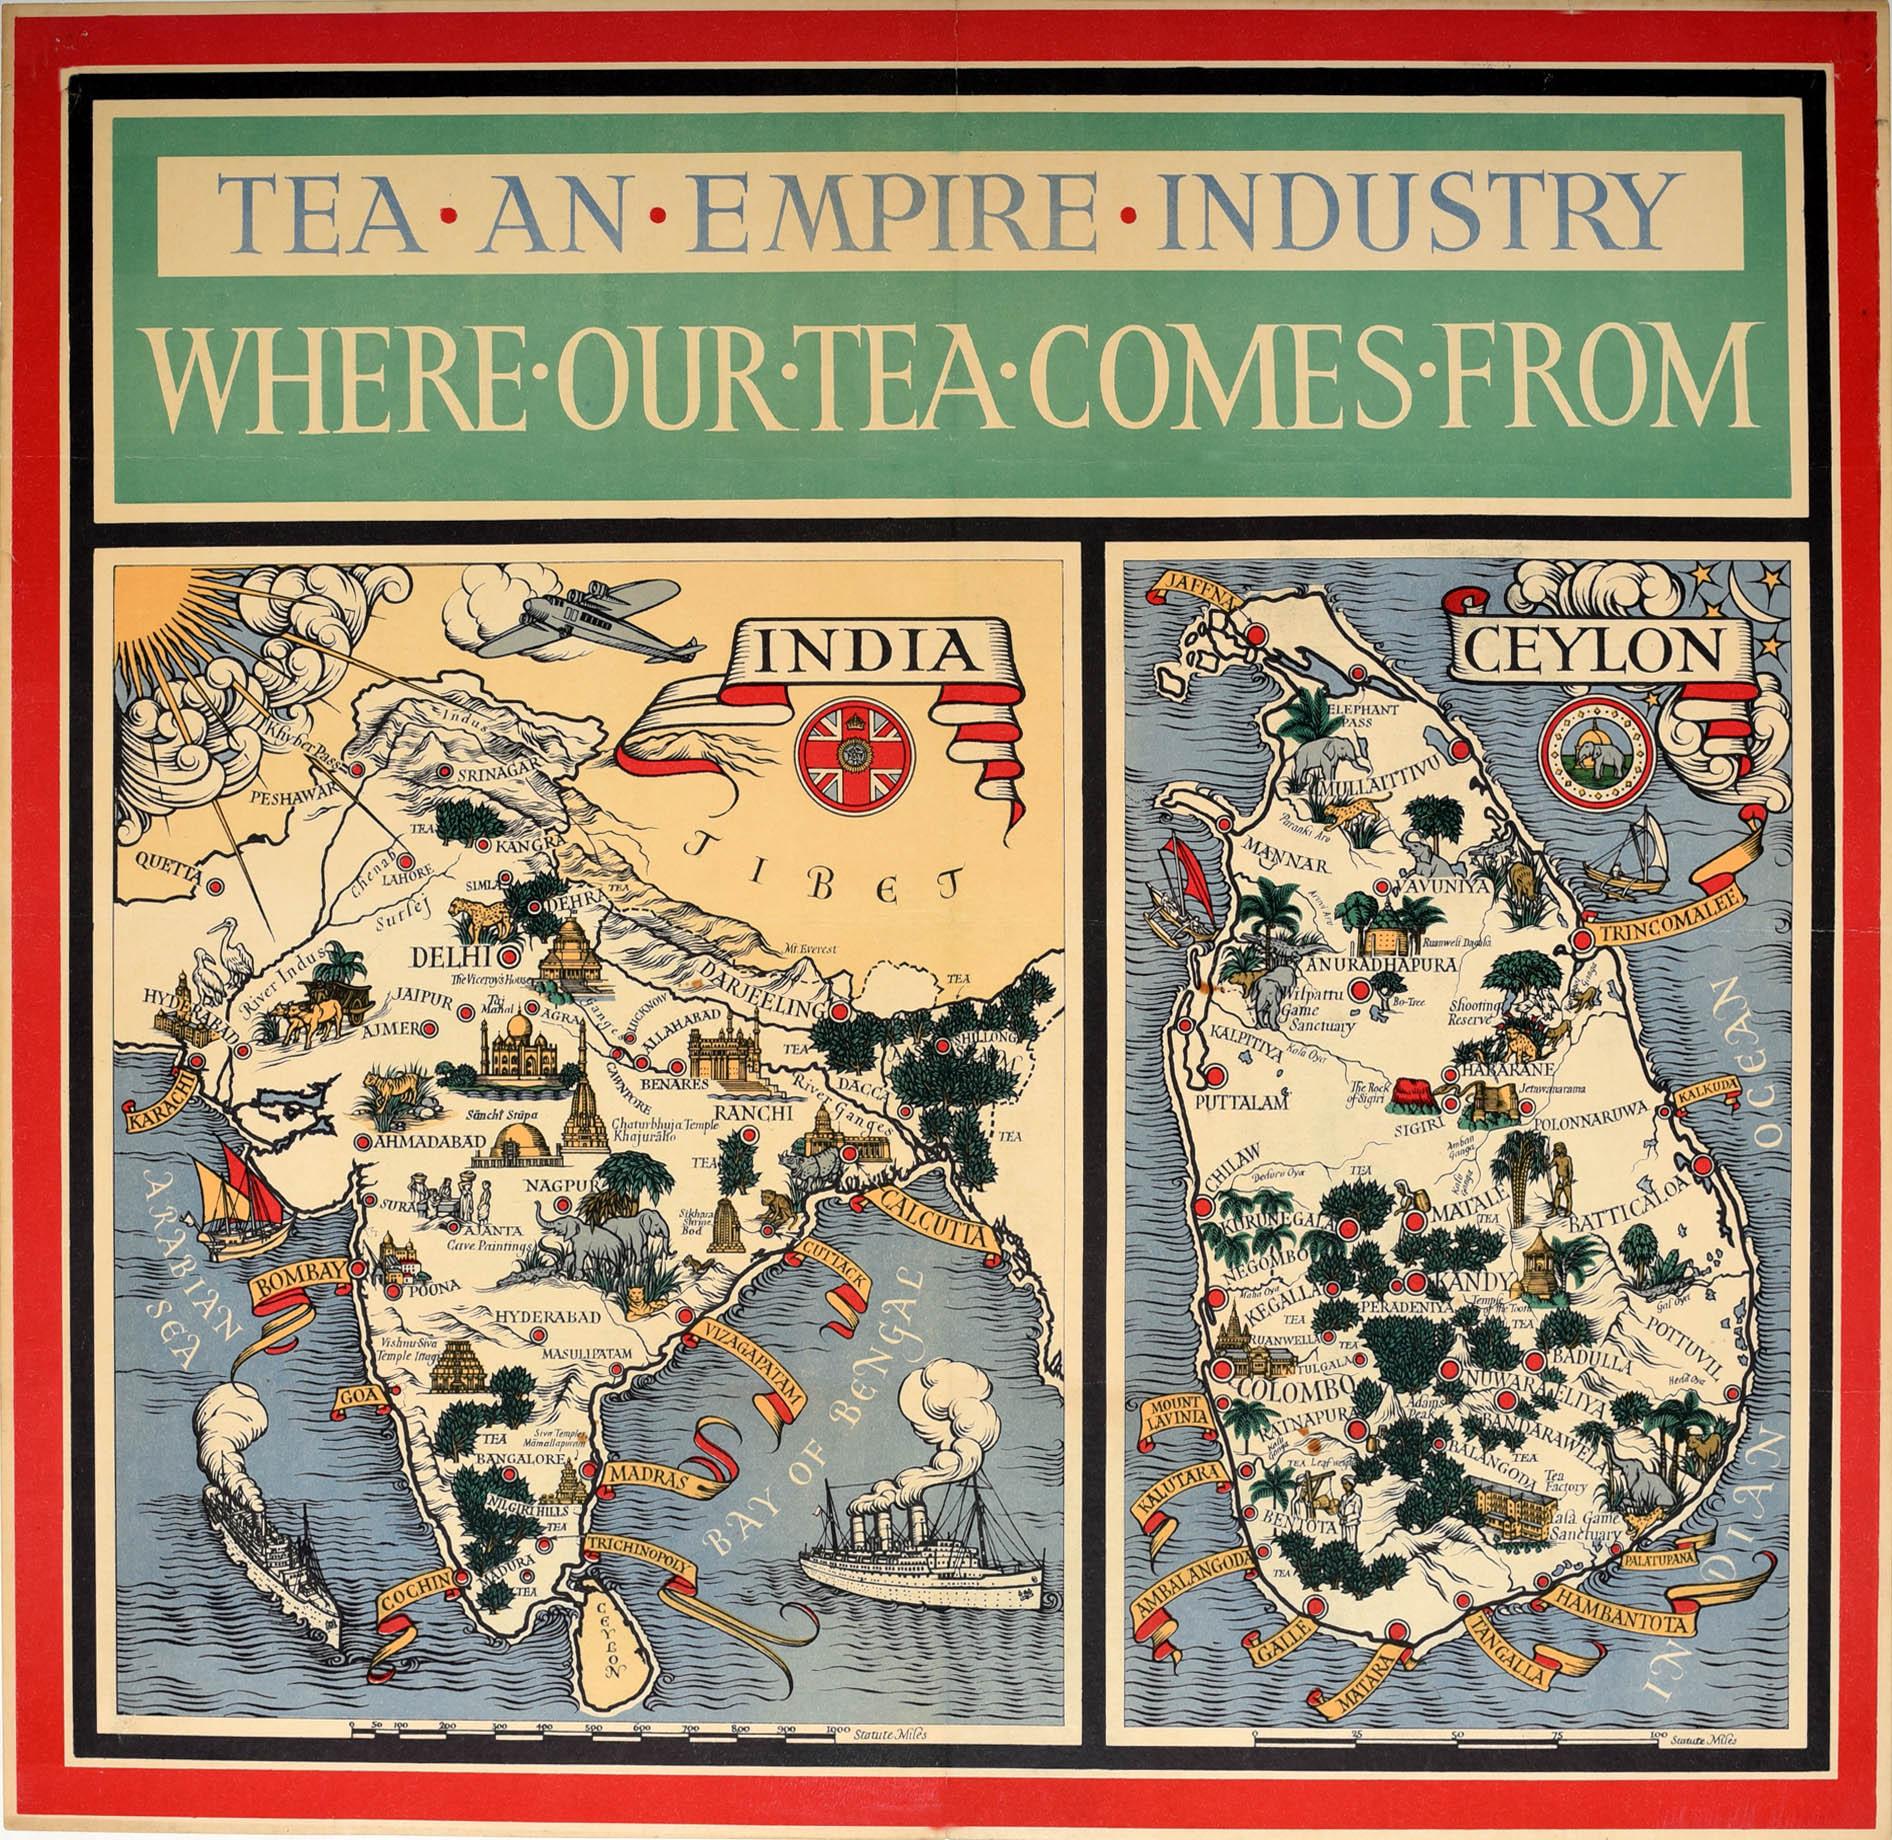 Macdonald Gill Print - Original Vintage Illustrated Map Poster Empire Industry Where Our Tea Comes From